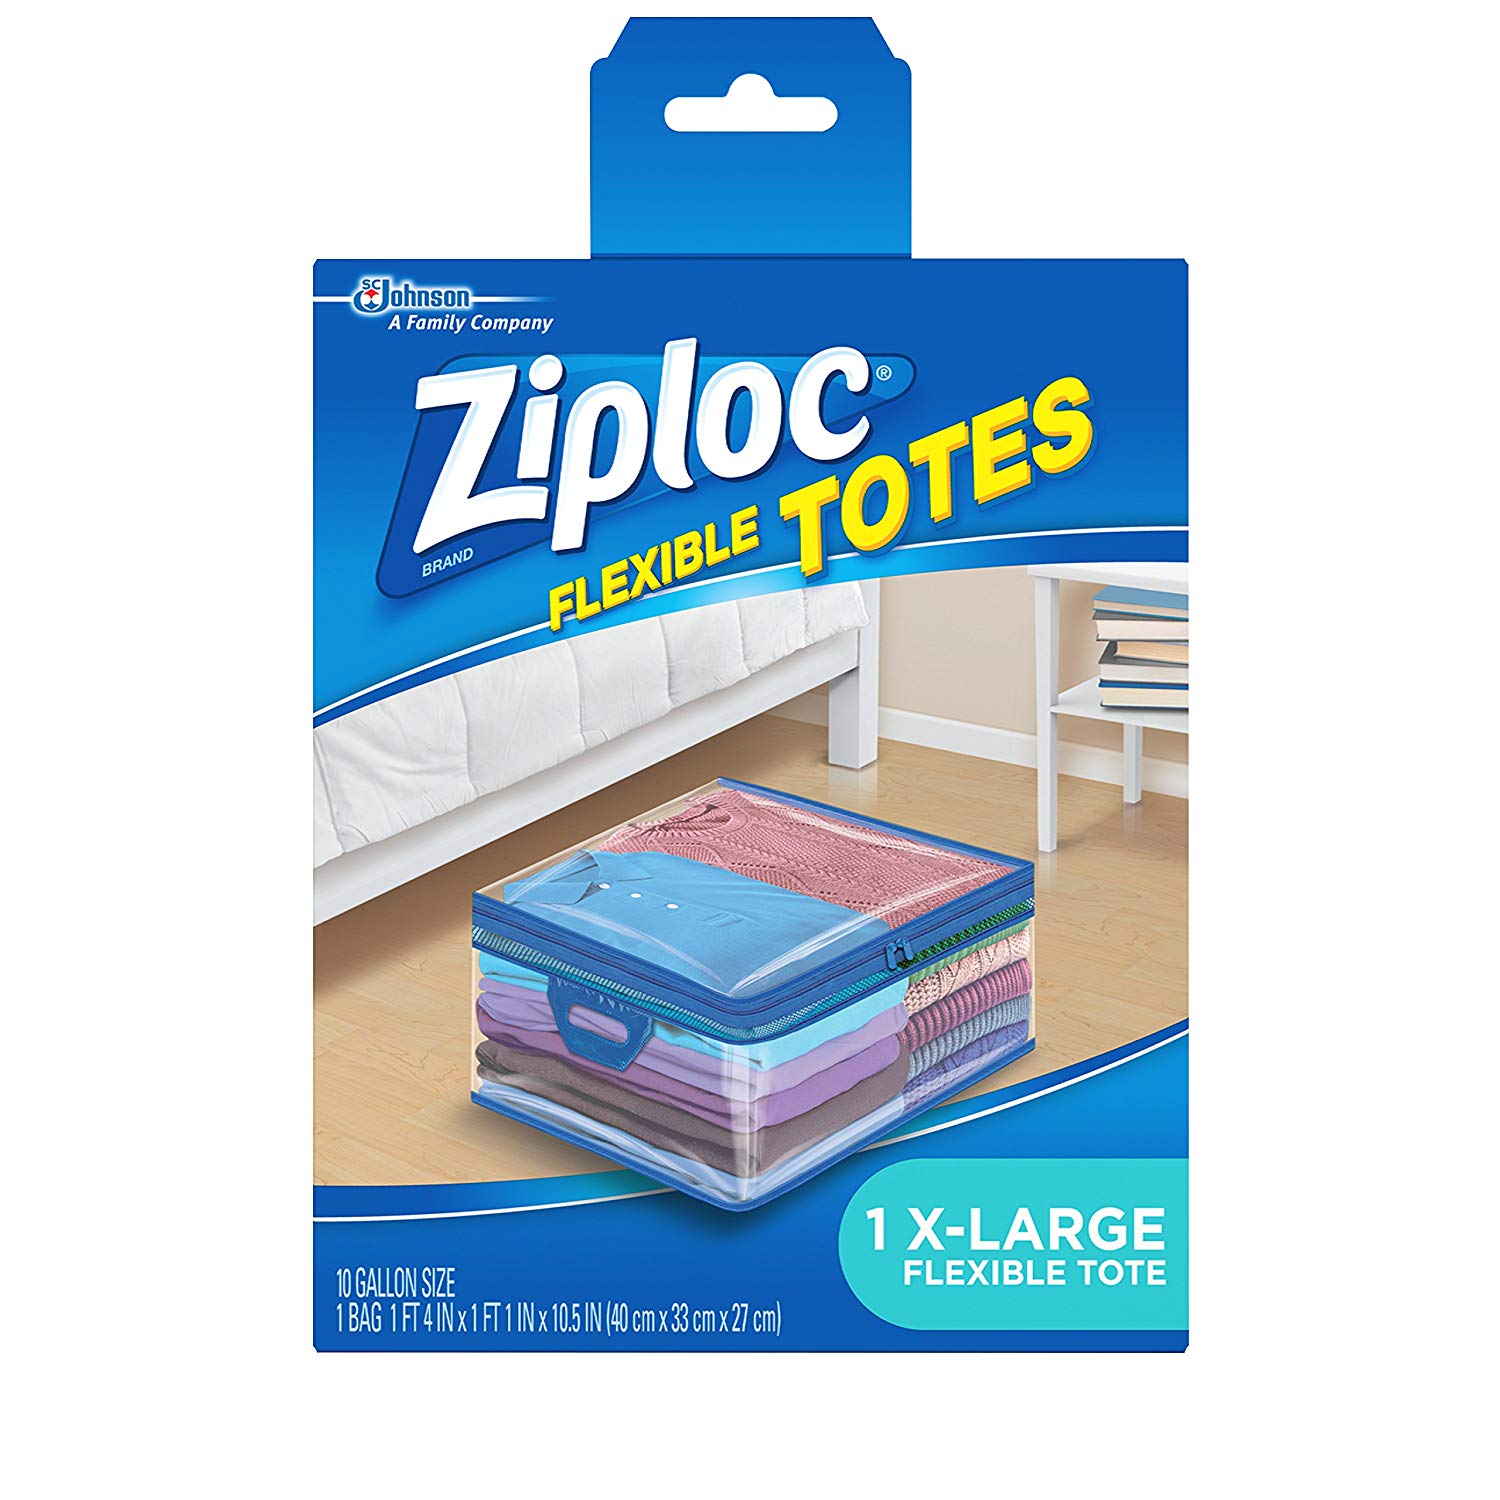 LIMITED TIME DEAL!!! Ziploc Flexible Totes X-Large (Pack of 4) $11.95 (REG $20.97)